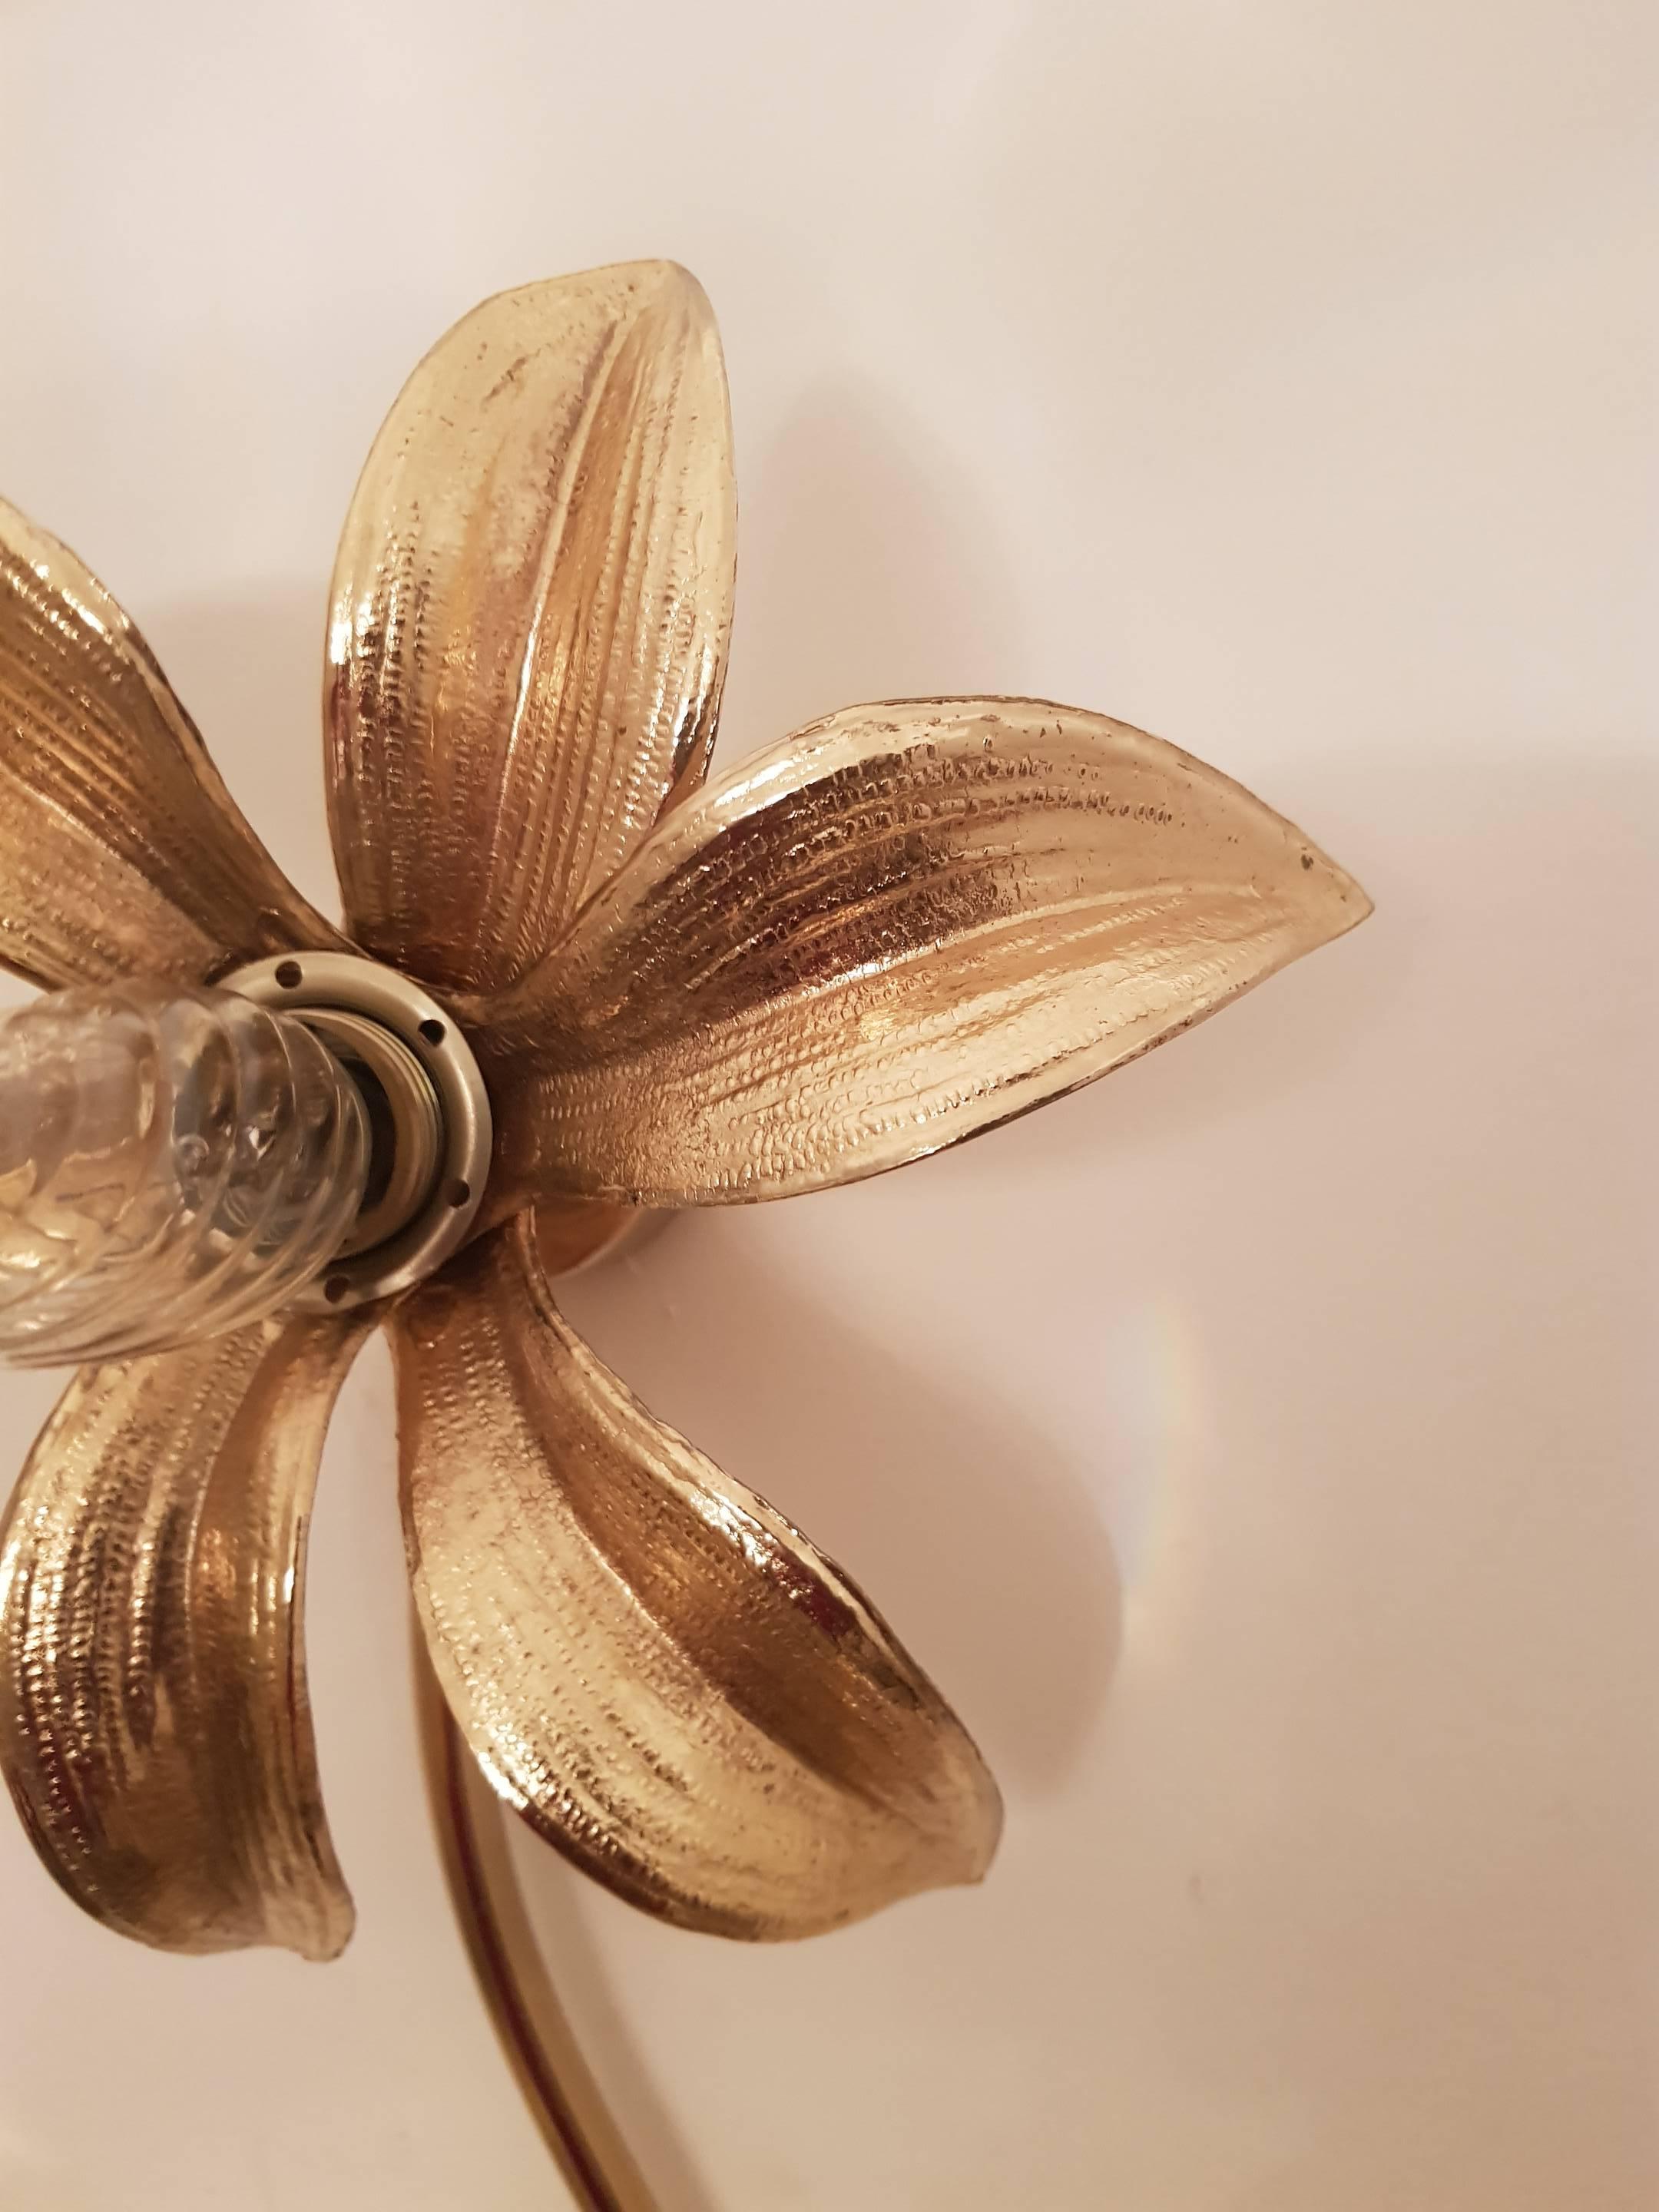  1970s, Wall lamp and wall sculpture in one, brass steel and 3 brass blossom flower lamps.
So u have 2 in one a piece of art and wall light, this piece   is nice in the hall, lilvingroom or bedroom.

Make me an offer
